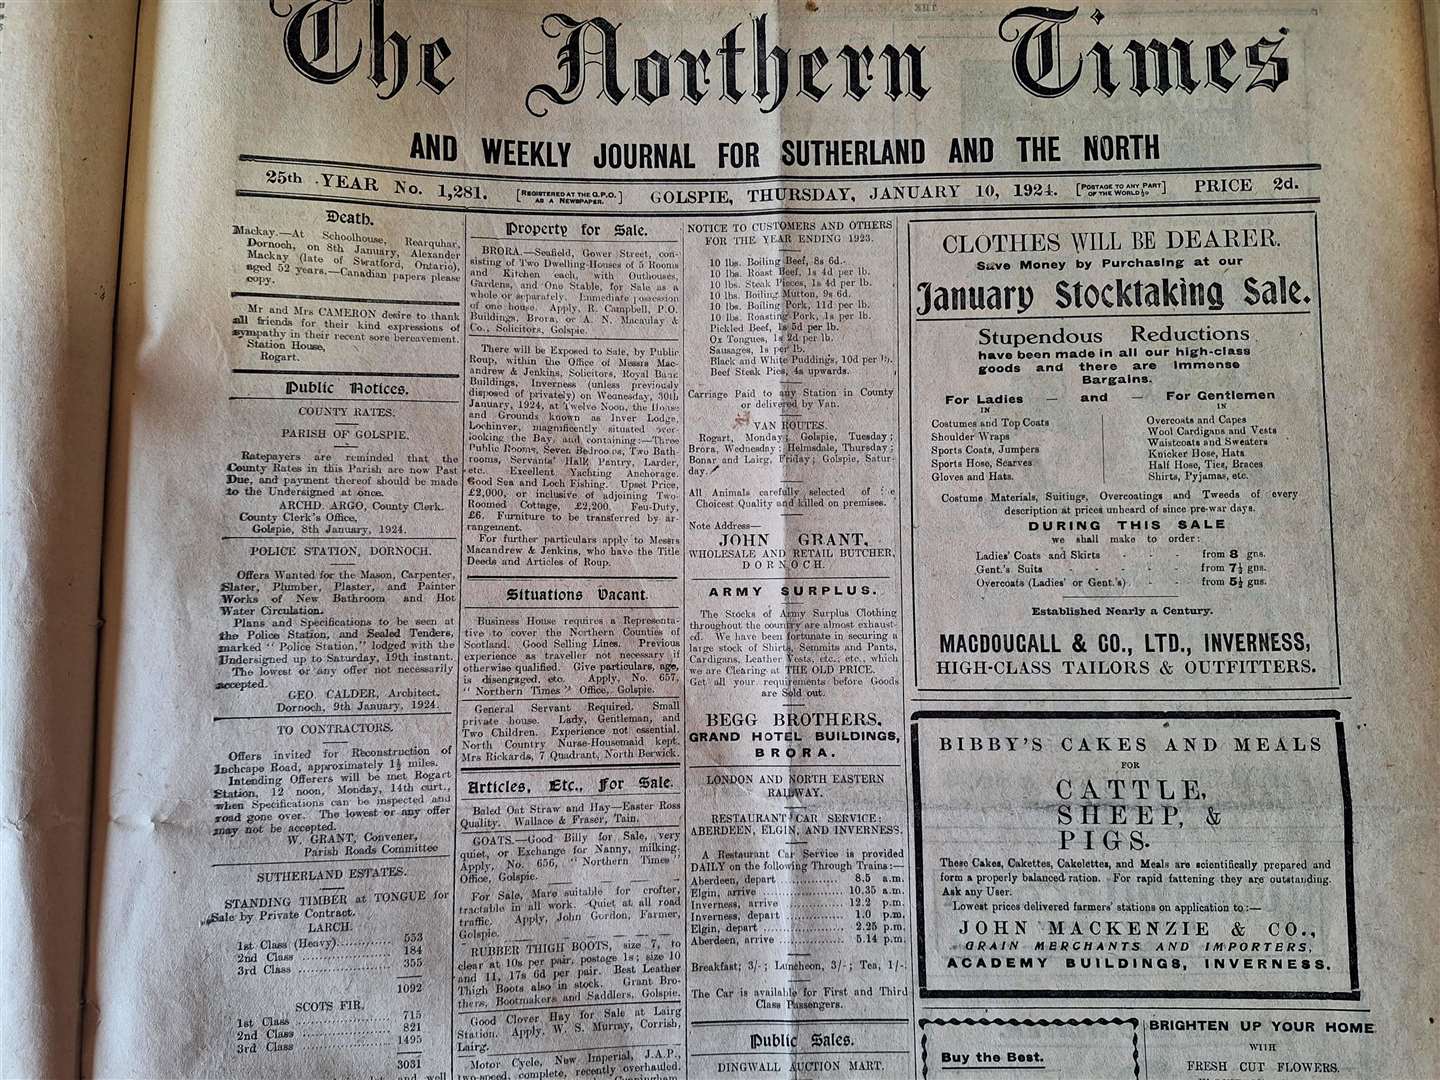 The edition of January 10, 1924.